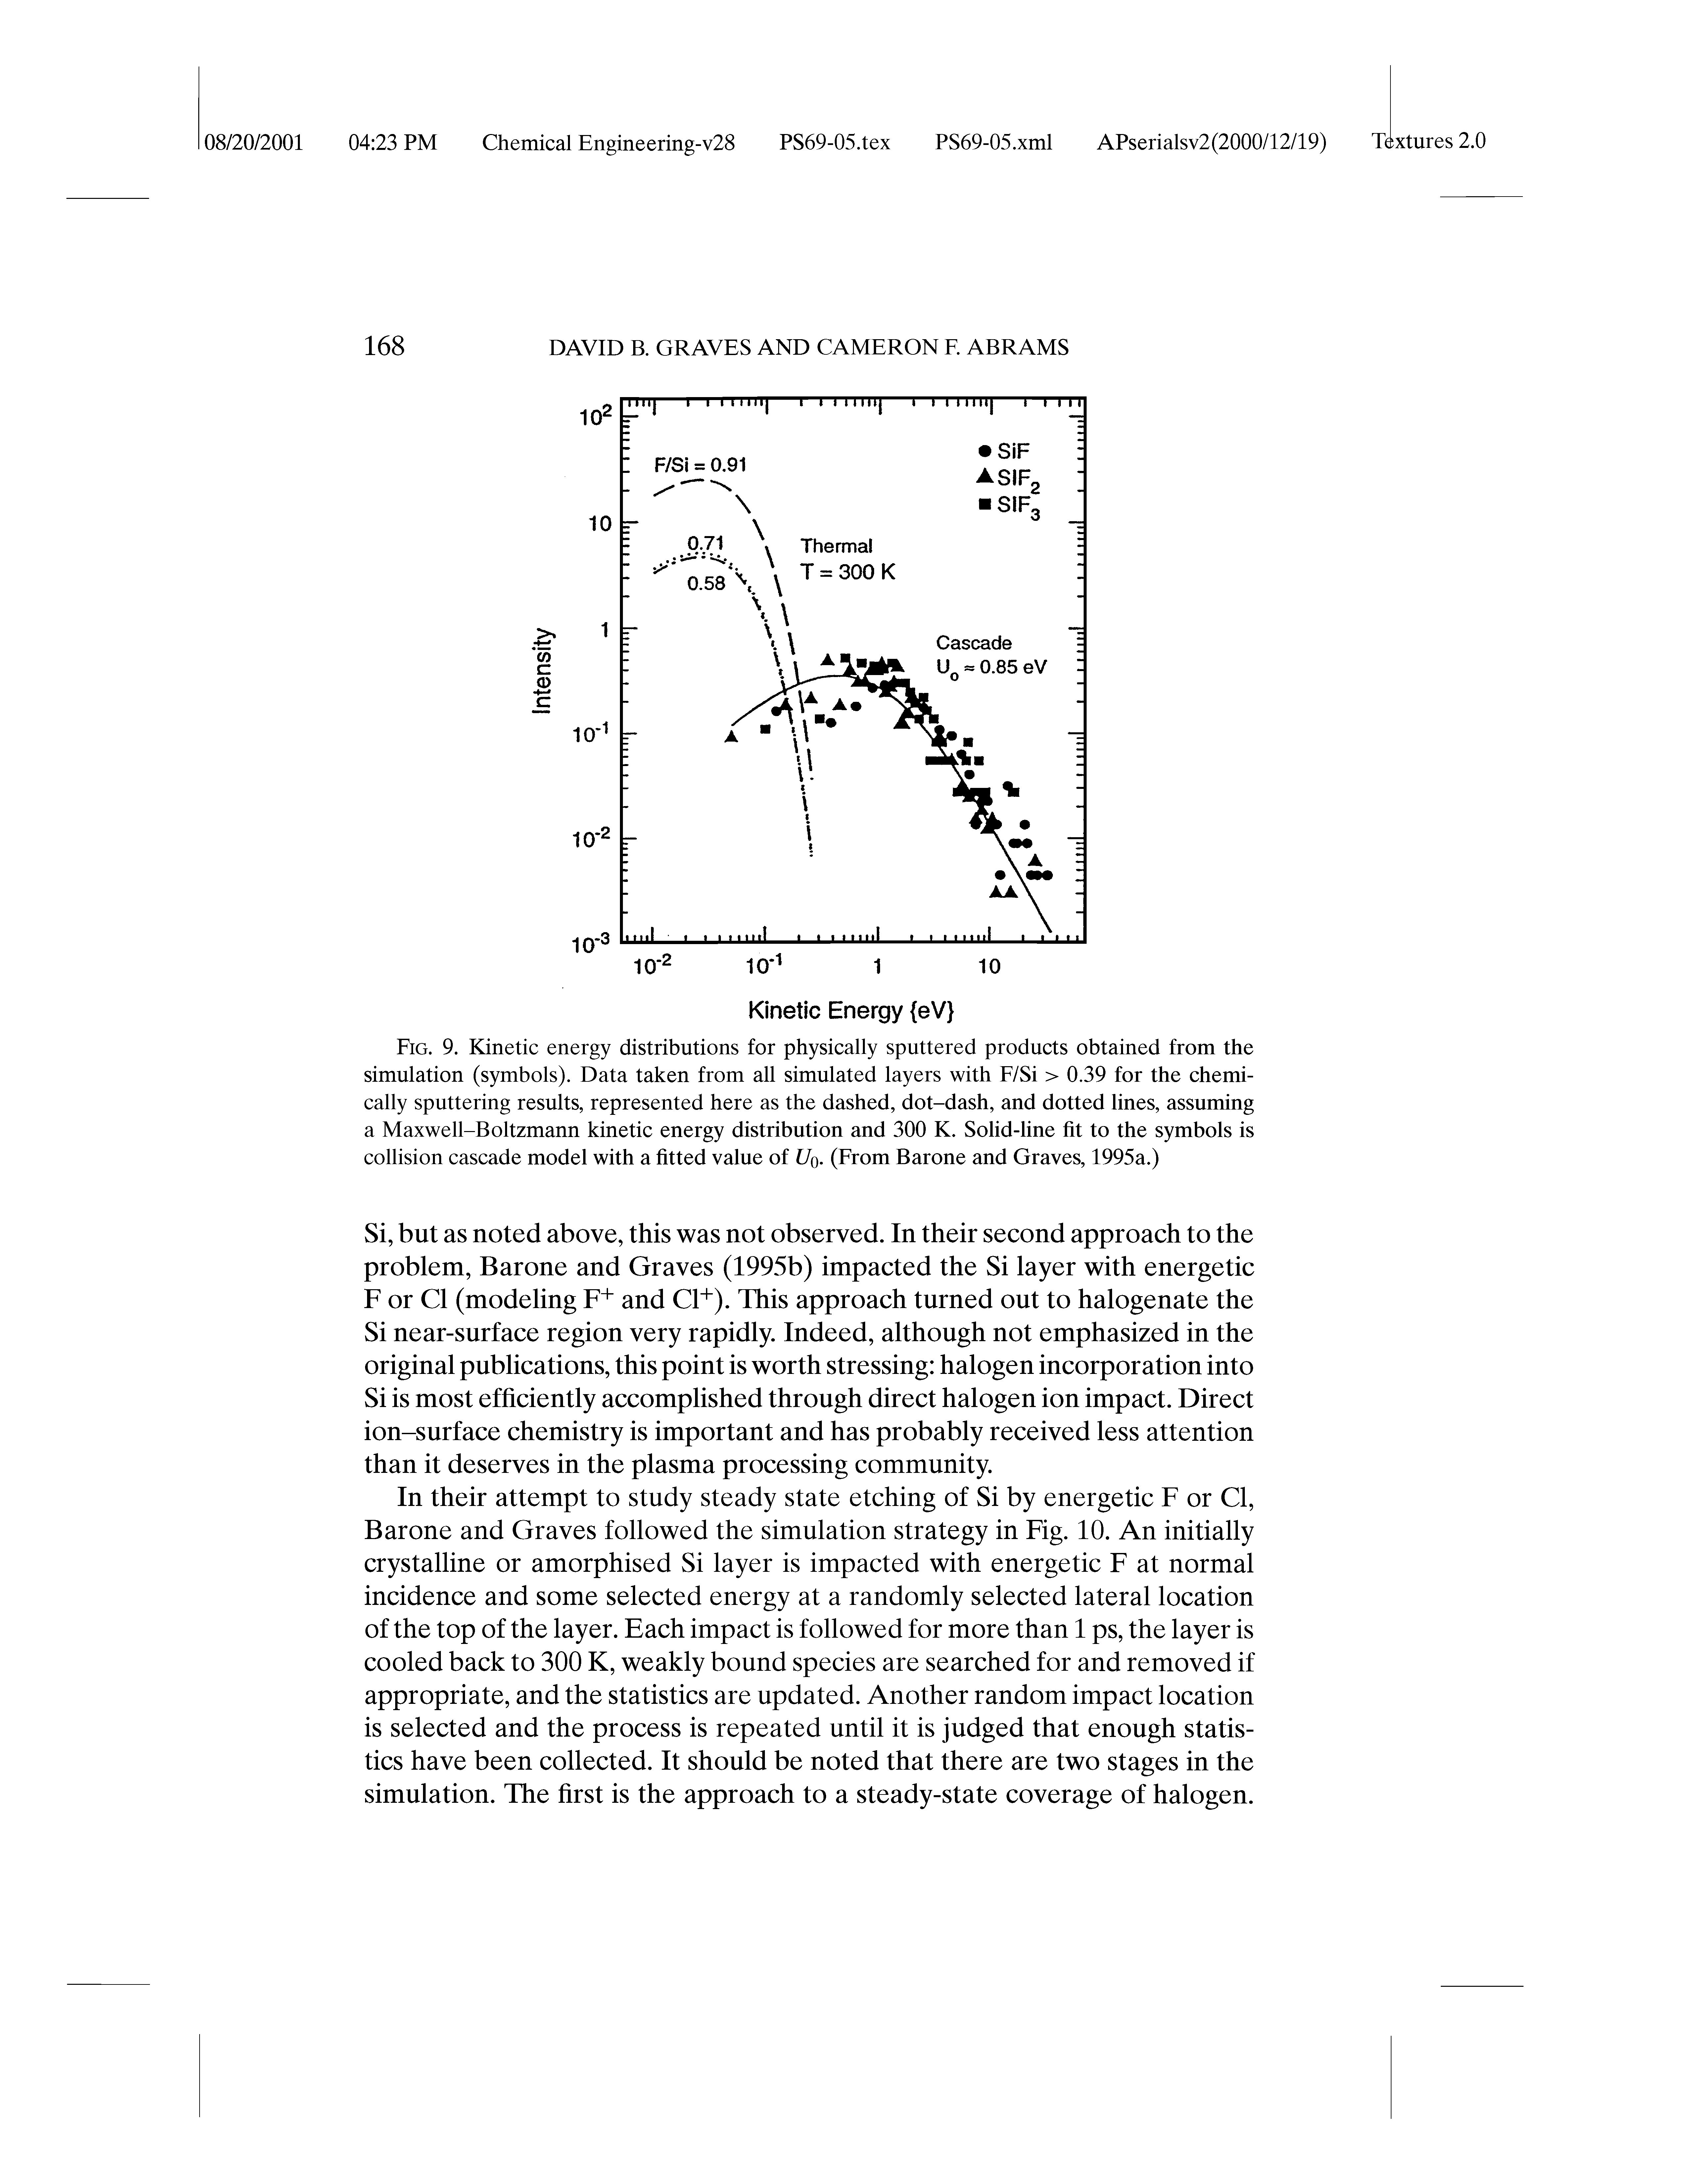 Fig. 9. Kinetic energy distributions for physically sputtered products obtained from the simulation (symbols). Data taken from all simulated layers with F/Si > 0.39 for the chemically sputtering results, represented here as the dashed, dot-dash, and dotted lines, assuming a Maxwell-Boltzmann kinetic energy distribution and 300 K. Solid-line fit to the symbols is collision cascade model with a fitted value of Uq. (From Barone and Graves, 1995a.)...